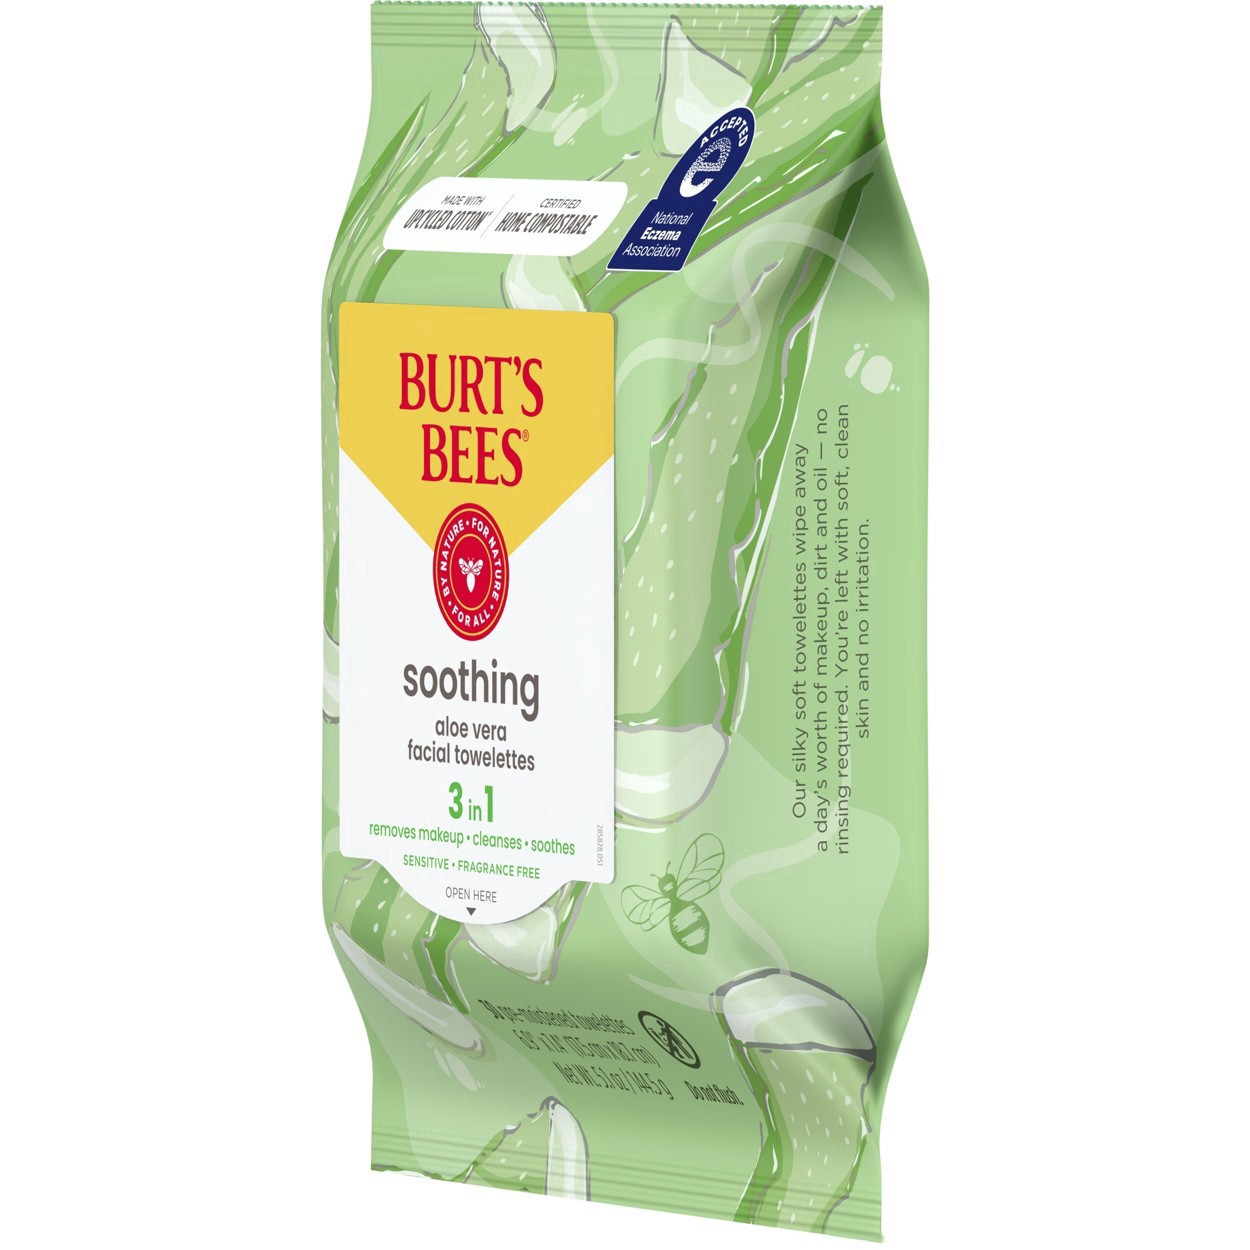 slide 133 of 137, Burt's Bees Soothing Facial Cleanser and Makeup Remover Towelettes with Aloe Vera for Sensitive Skin, Made with Upcycled Cotton, 30 Count, 30 ct